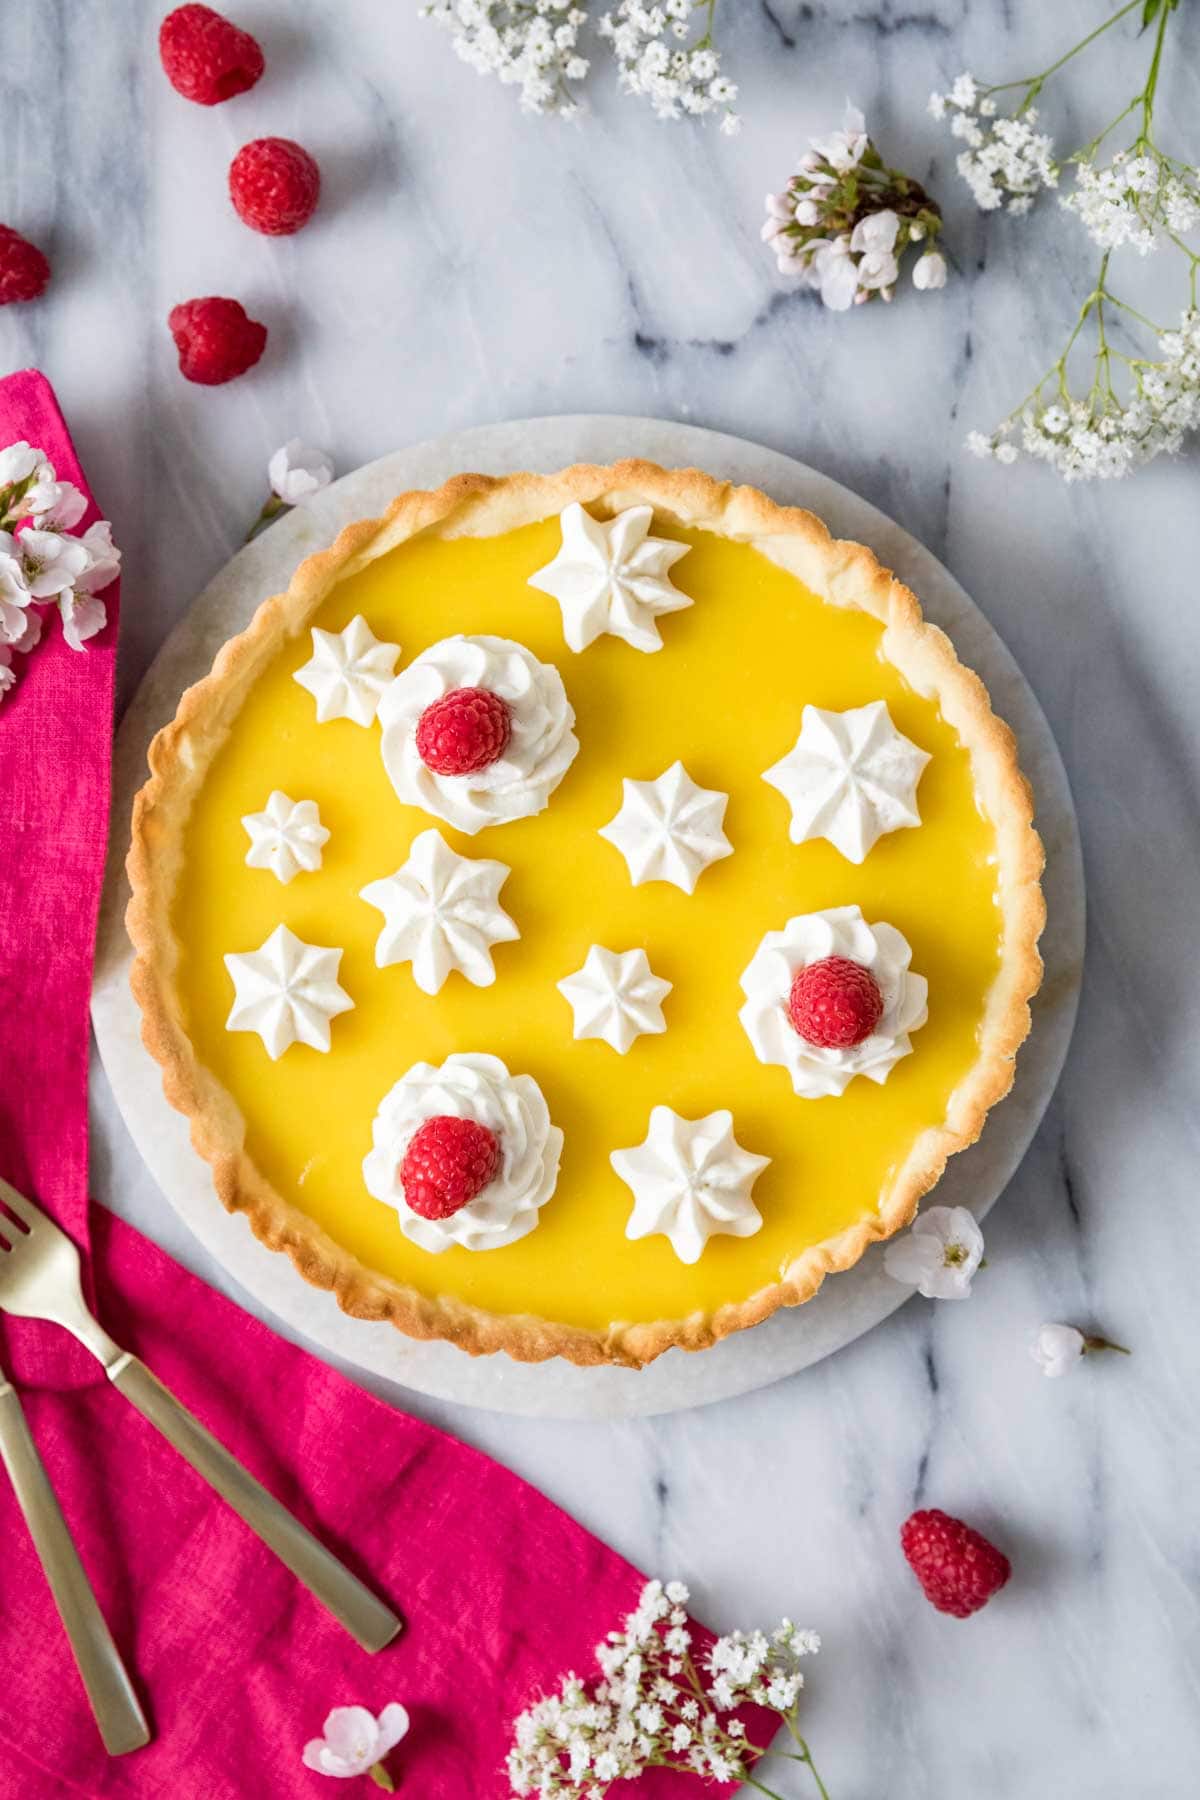 Overhead view of a lemon tart decorated with piped whipped cream and raspberries.